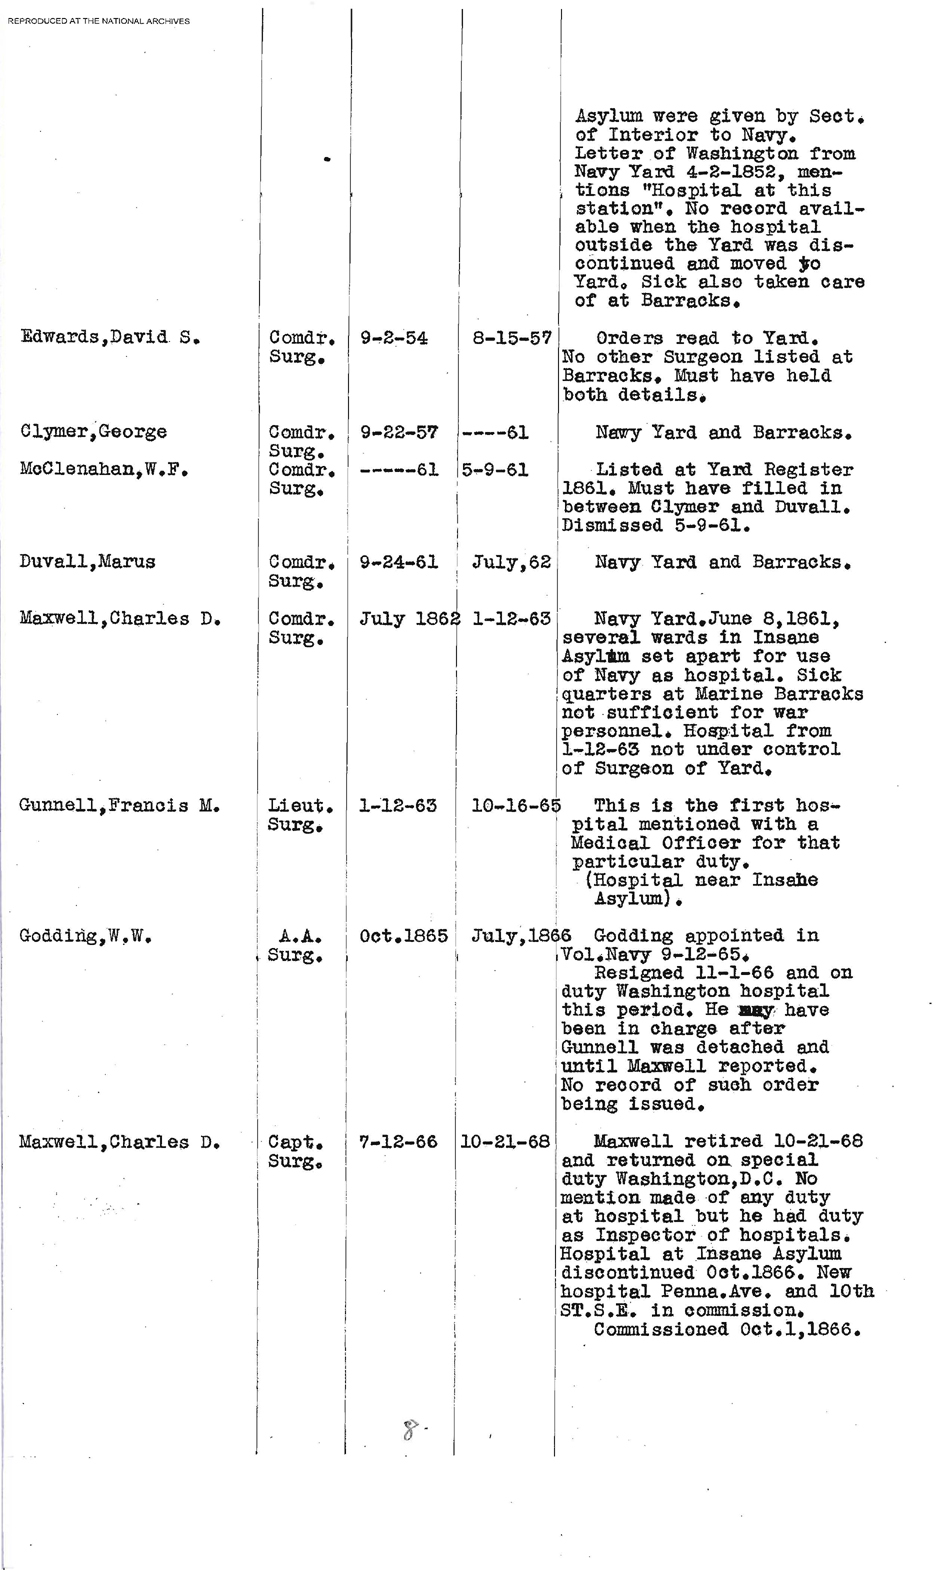 Roster of Commanding Officers of the Naval Hospital, Washington, DC, Page 8